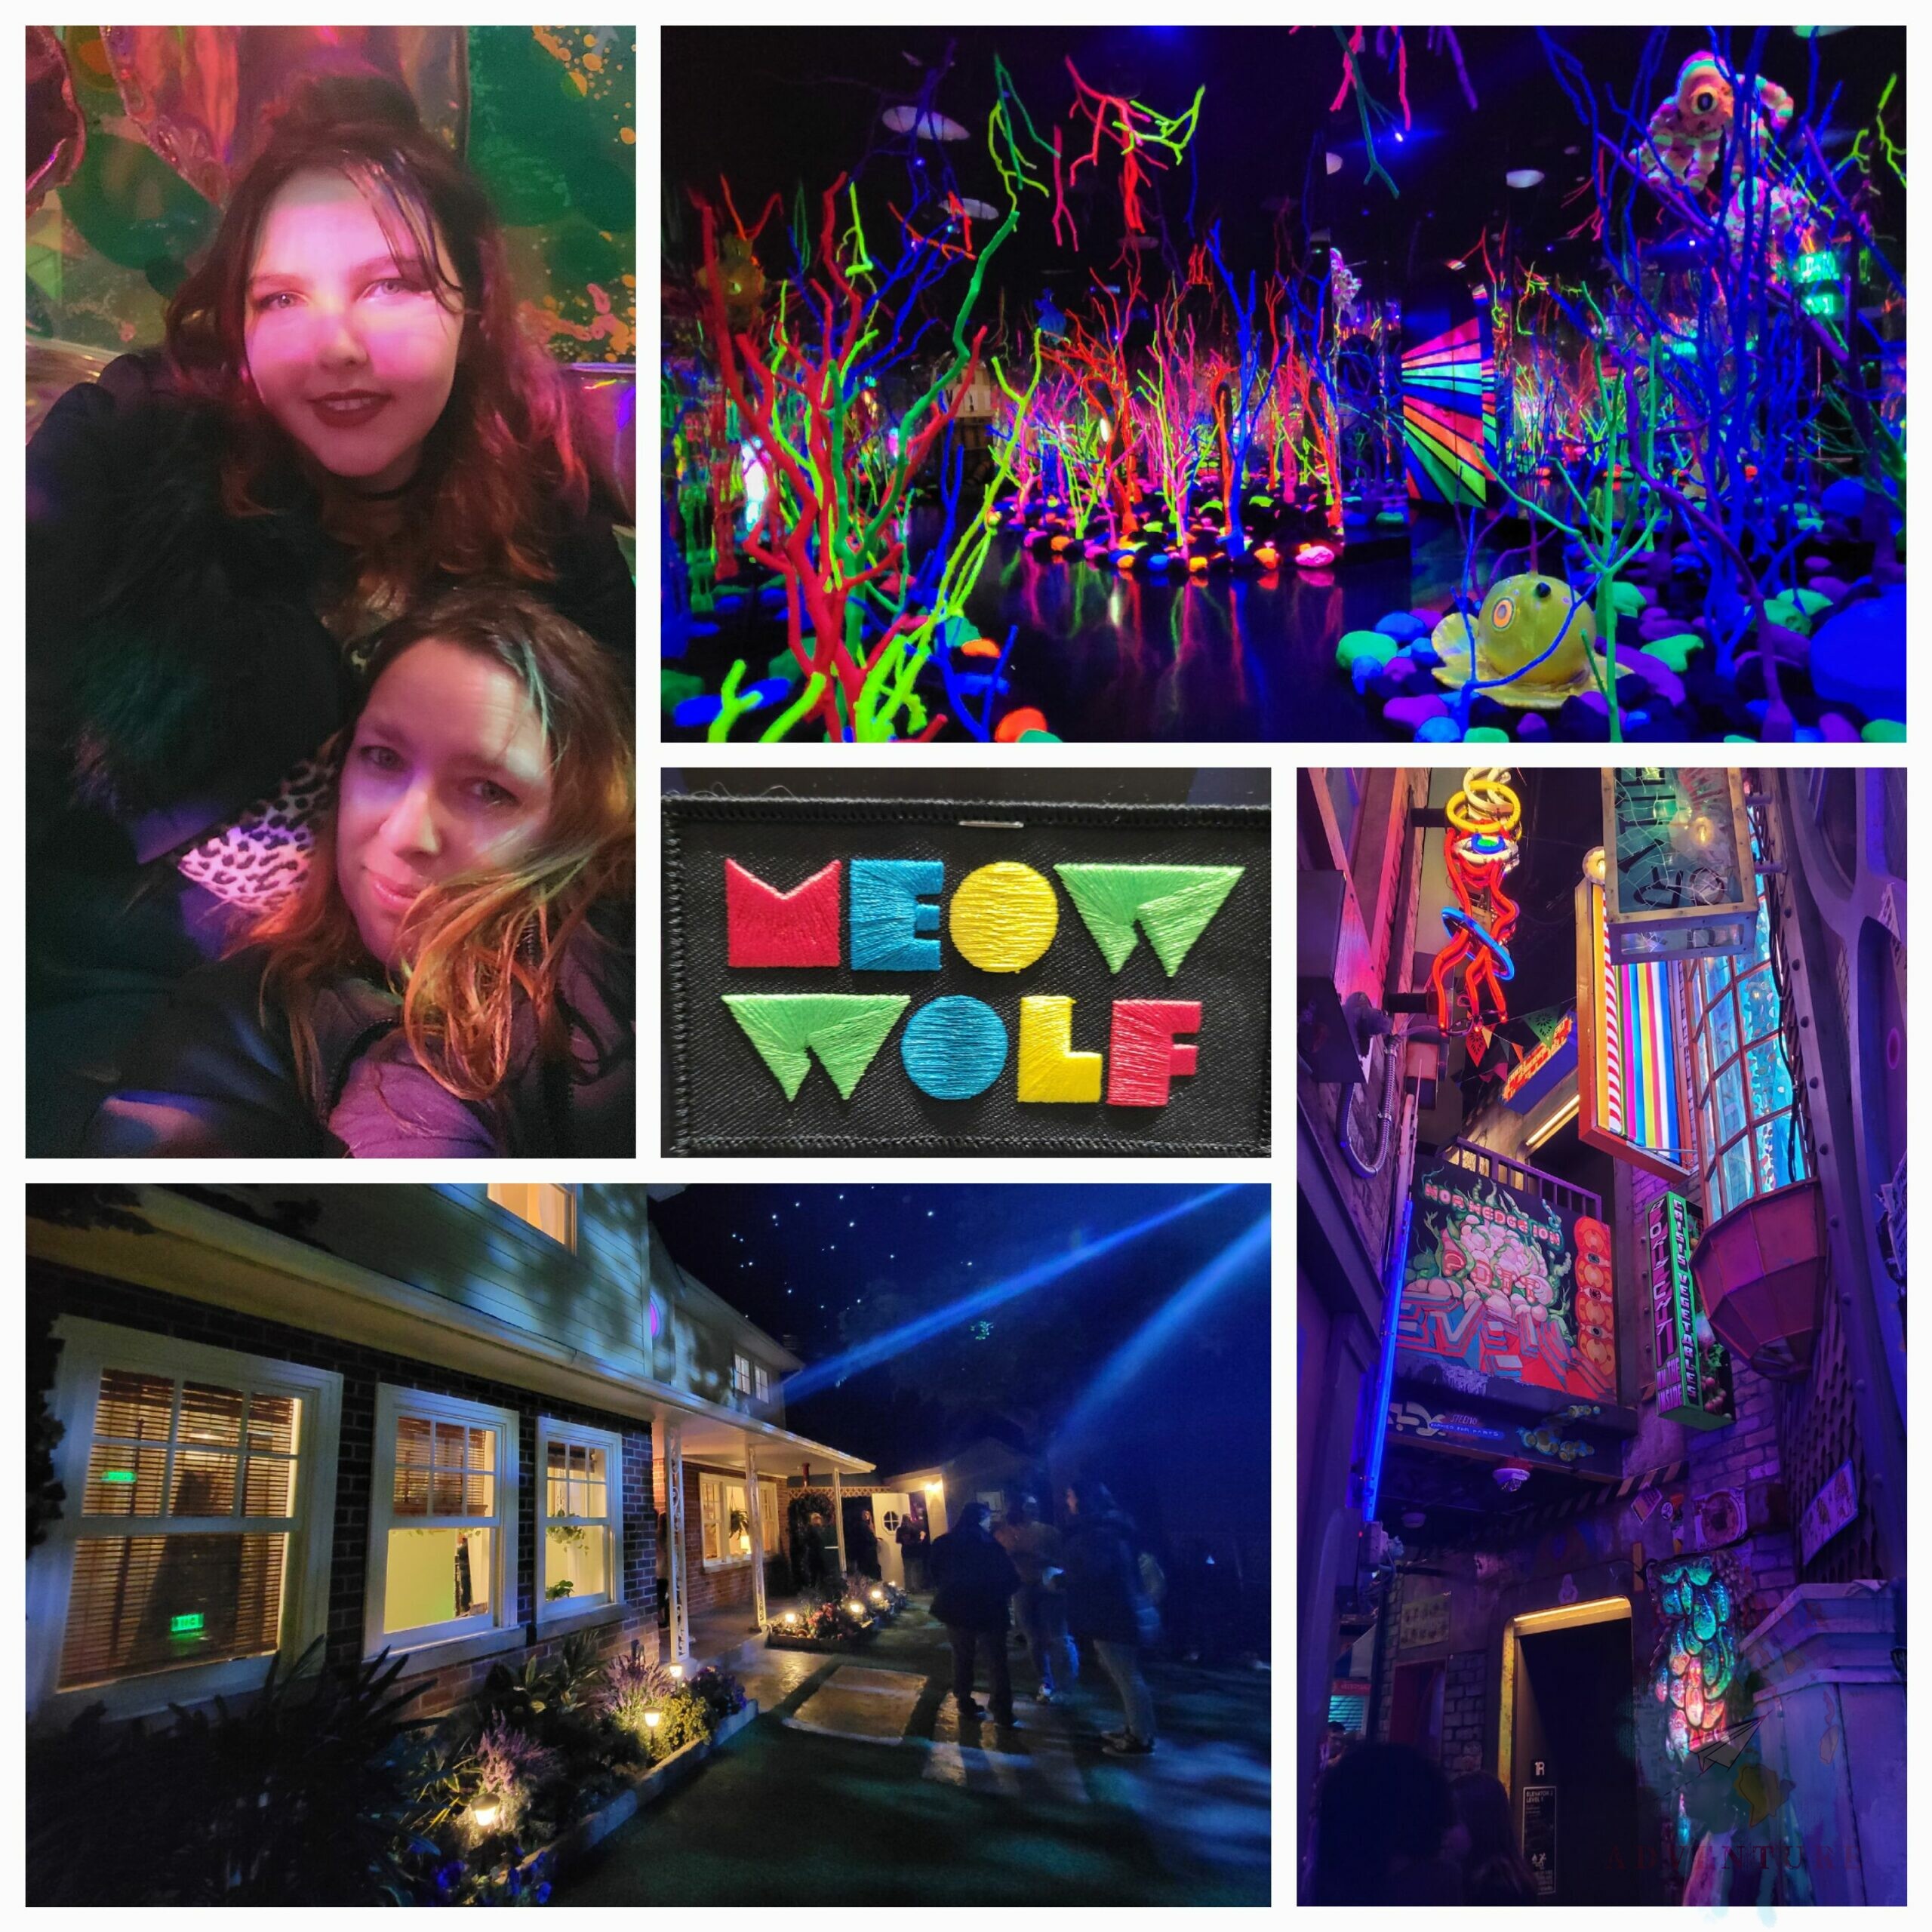 Meow Wolf in Grapevine, TX